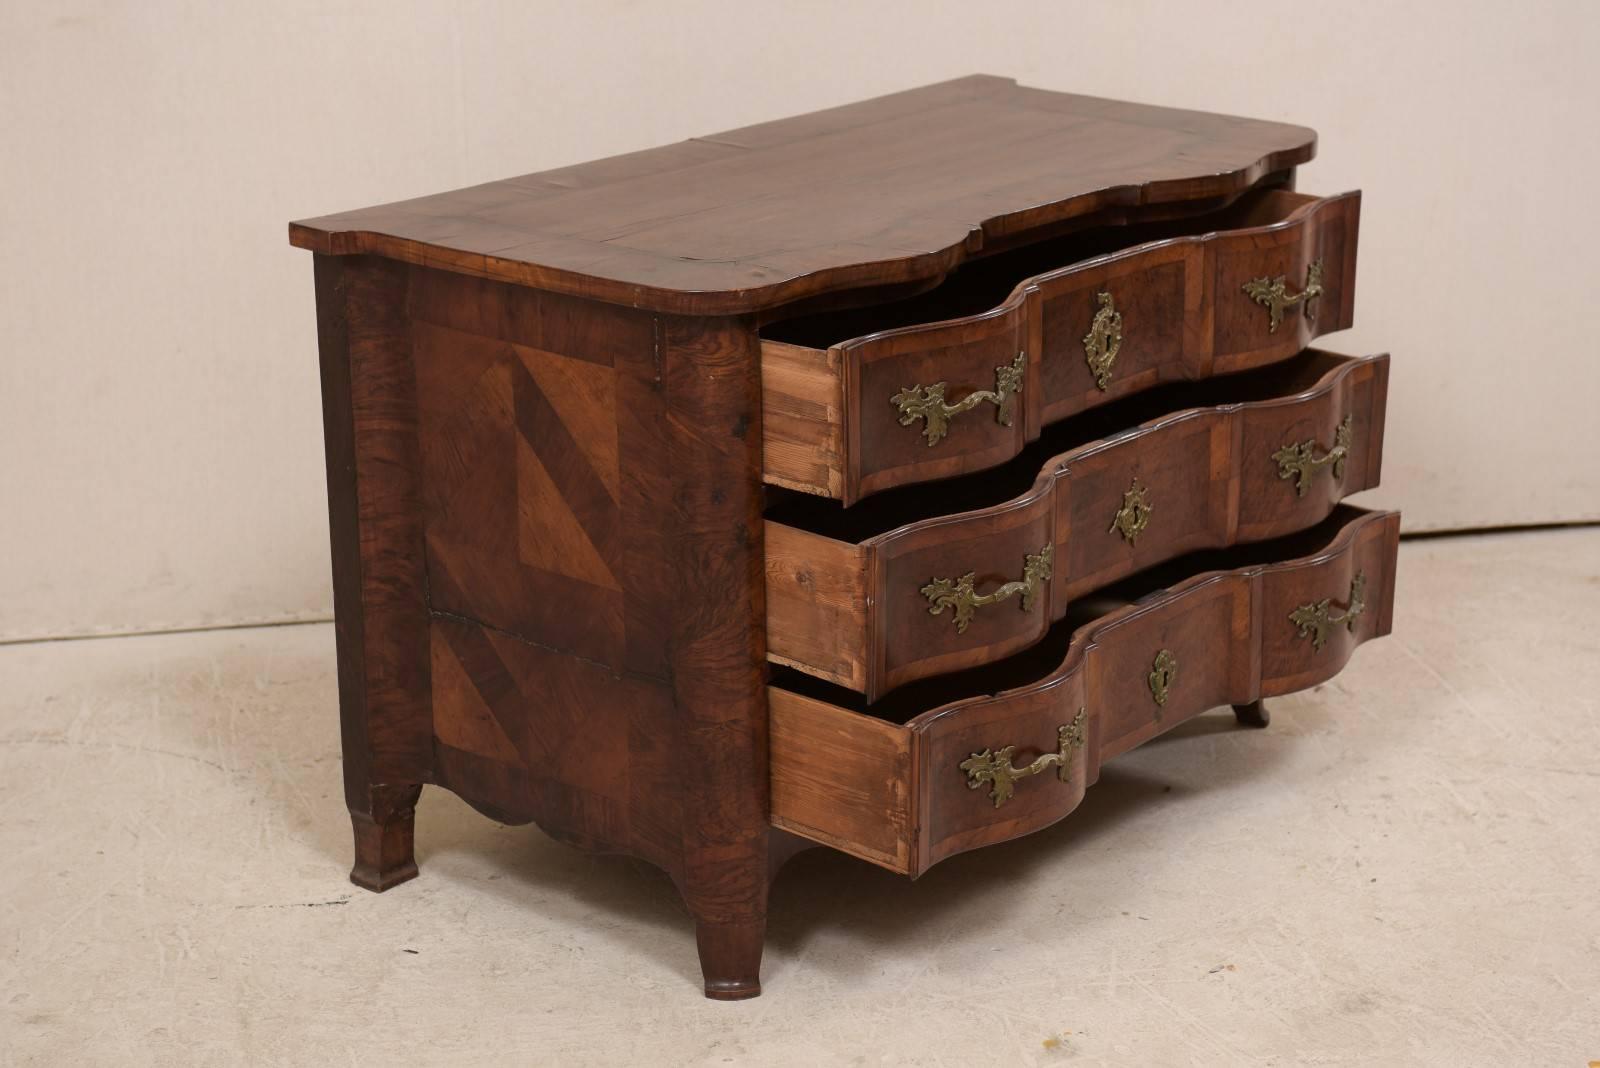 Period Baroque Swedish Wood Chest with Serpentine Front, circa 1725 For Sale 2